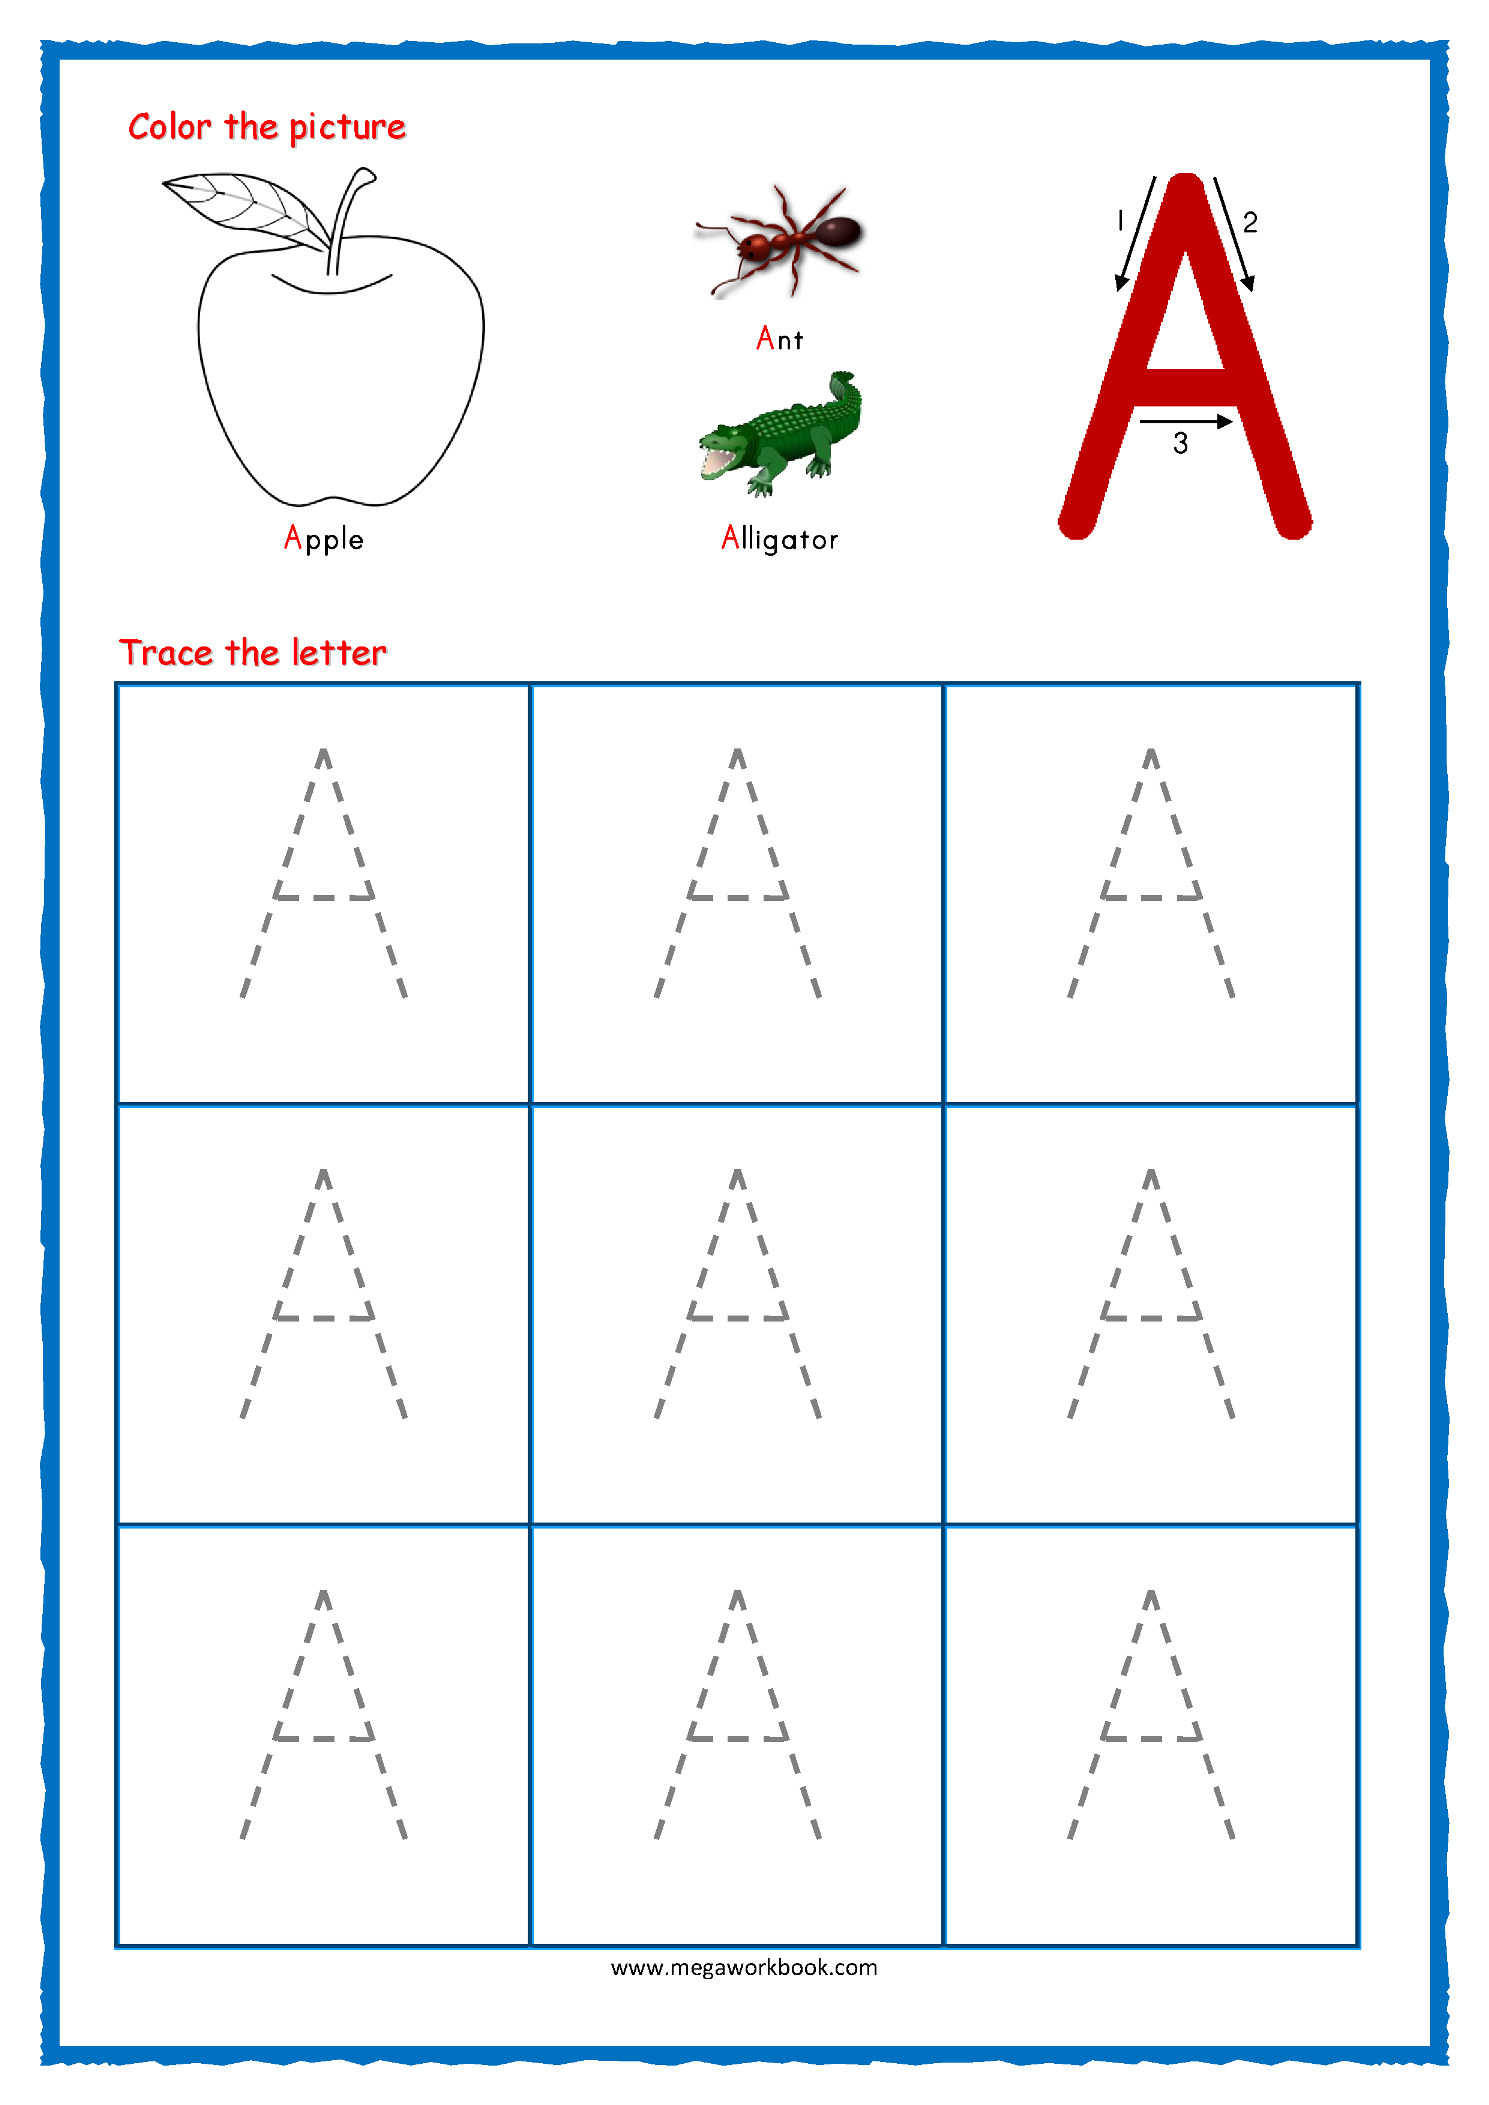 Tracing Letters - Alphabet Tracing - Capital Letters intended for Letter Tracing Exercises